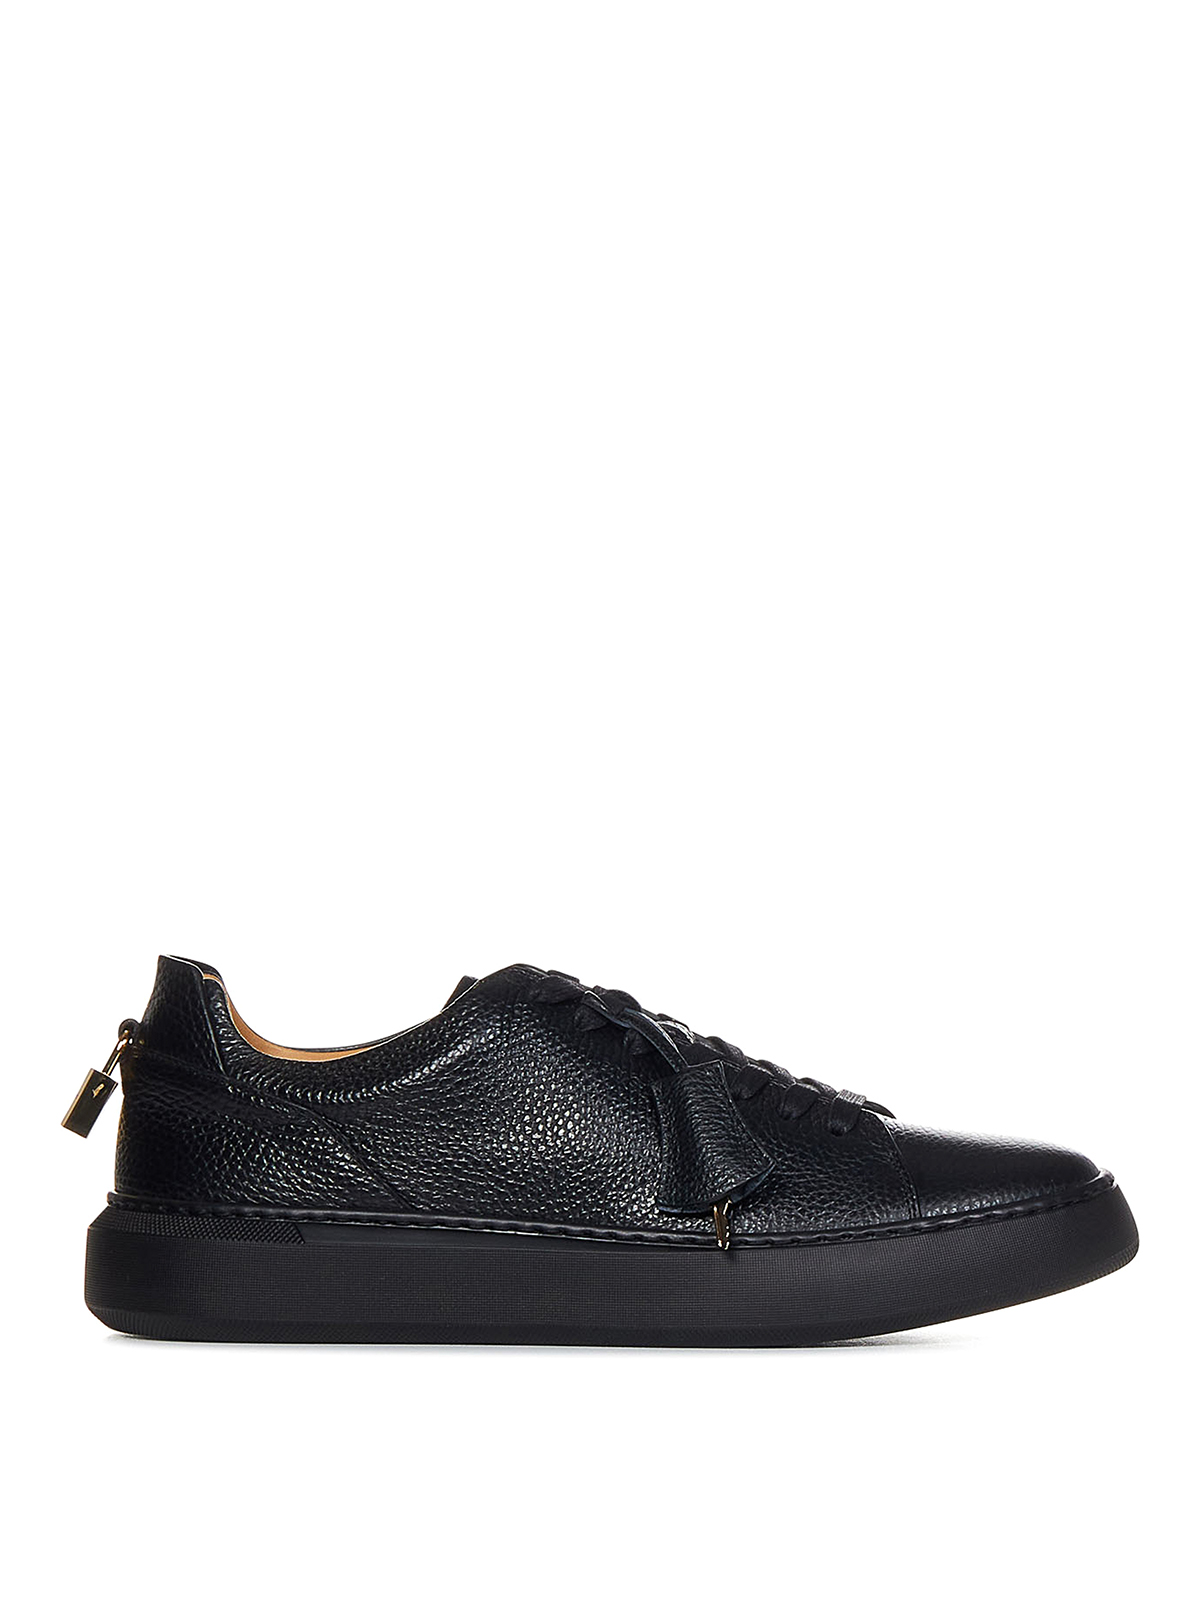 BUSCEMI LOW-TOP BLACK ALCE LEATHER SNEAKERS